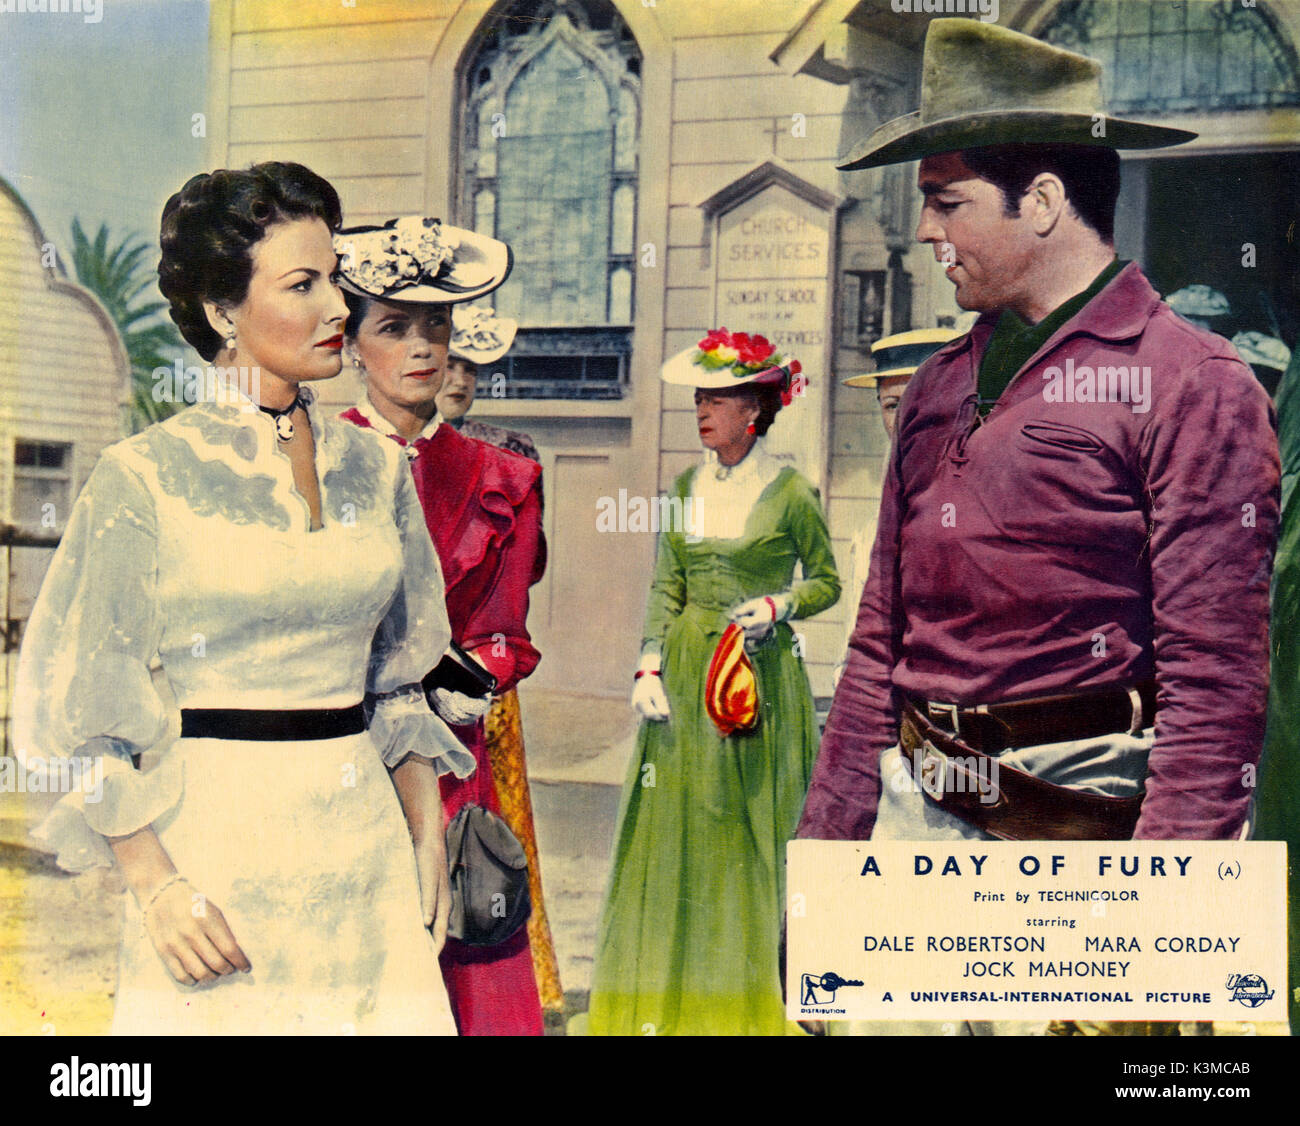 A DAY OF FURY [US 1956] MARA CORDAY, DALE ROBERTSON     Date: 1956 Stock Photo